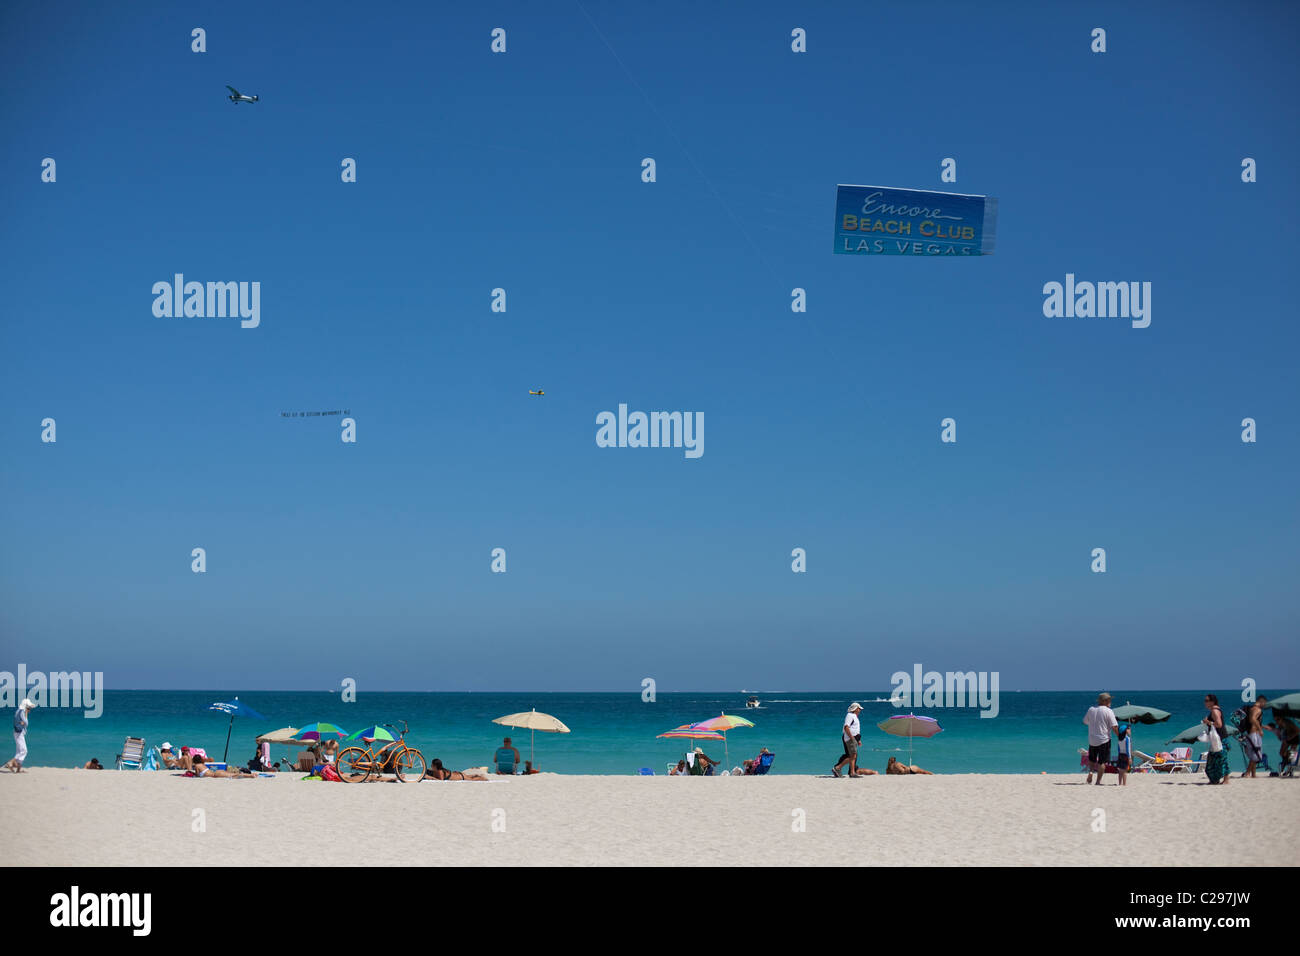 Airplane with advertising message flying over the beach, South Beach, Miami, Florida, USA Stock Photo